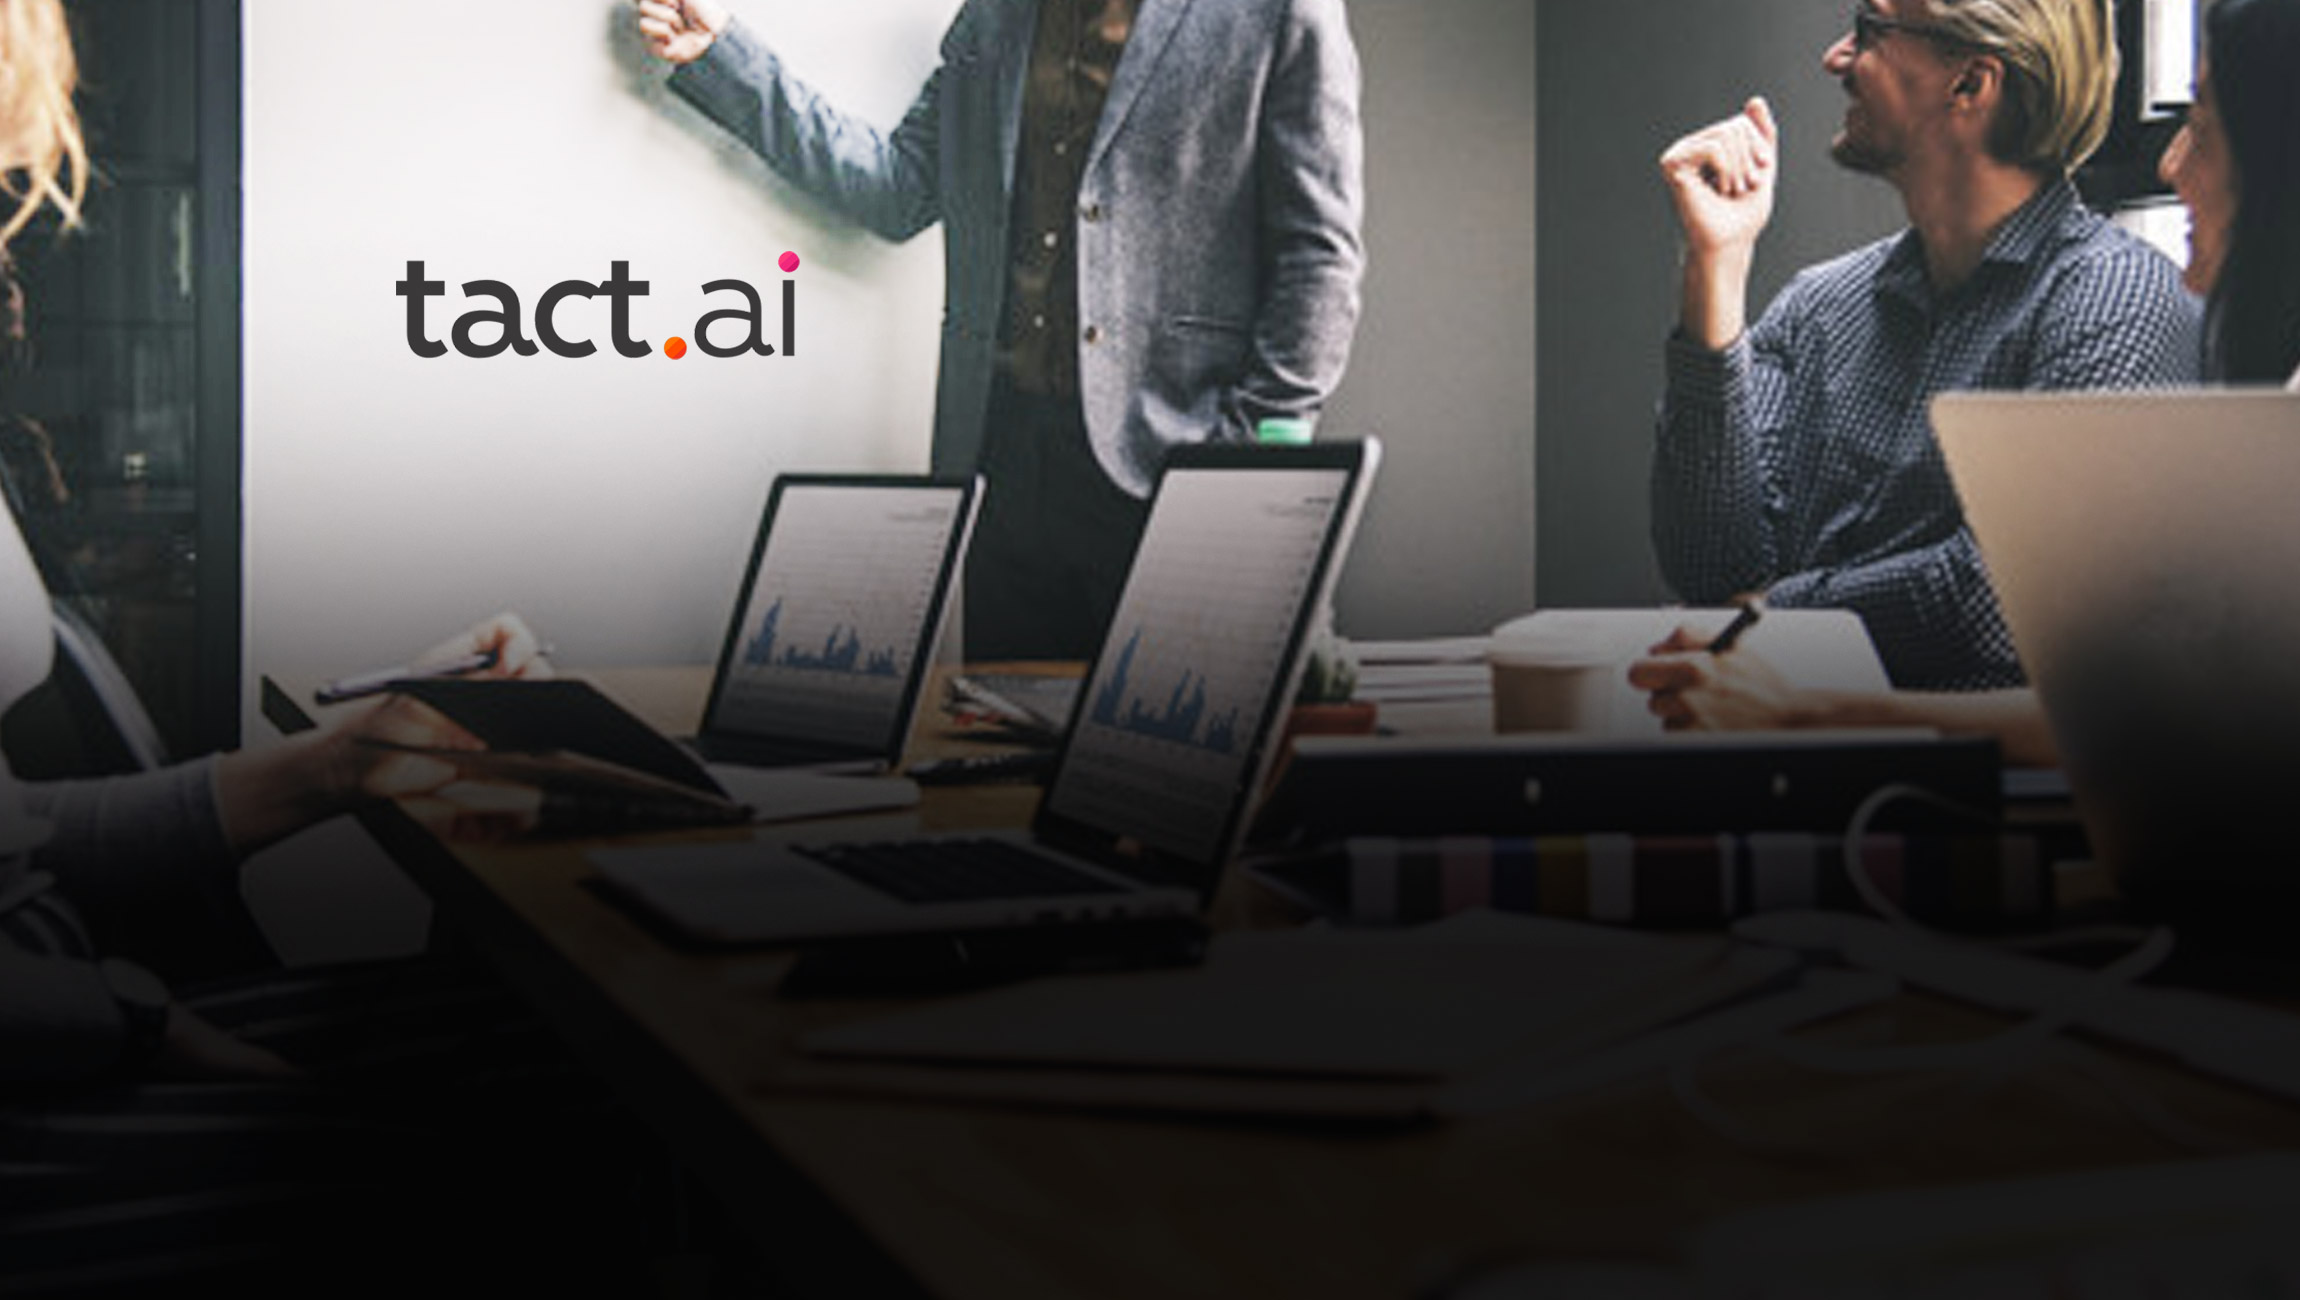 Tact.ai Receives Investment from Honeywell